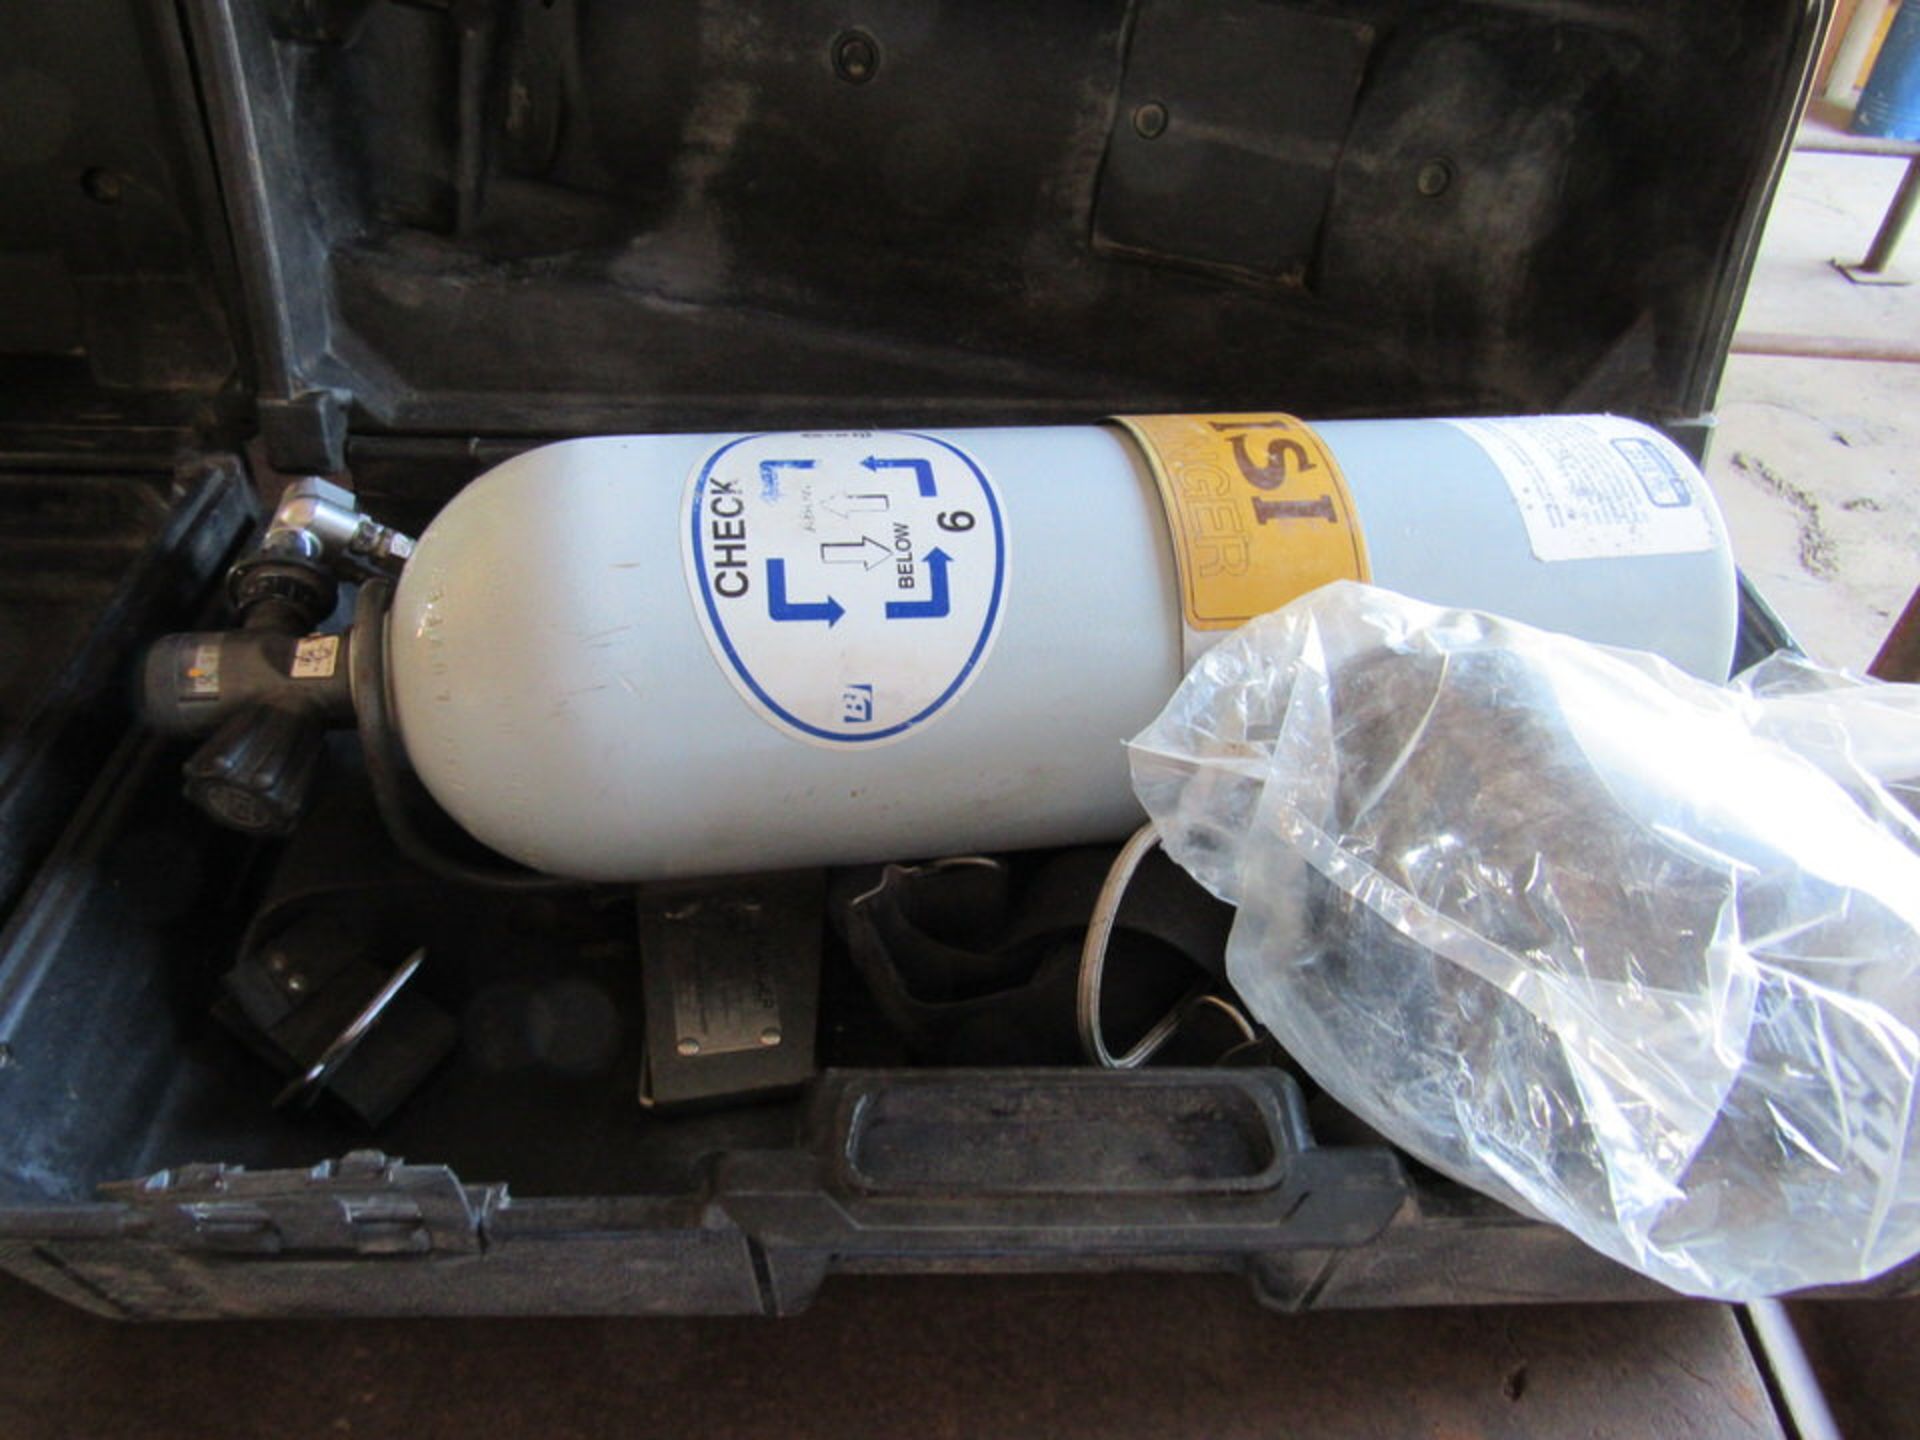 Two Air Tanks (Breathing Units) for Hazardous Operations, in Cases - Image 3 of 3